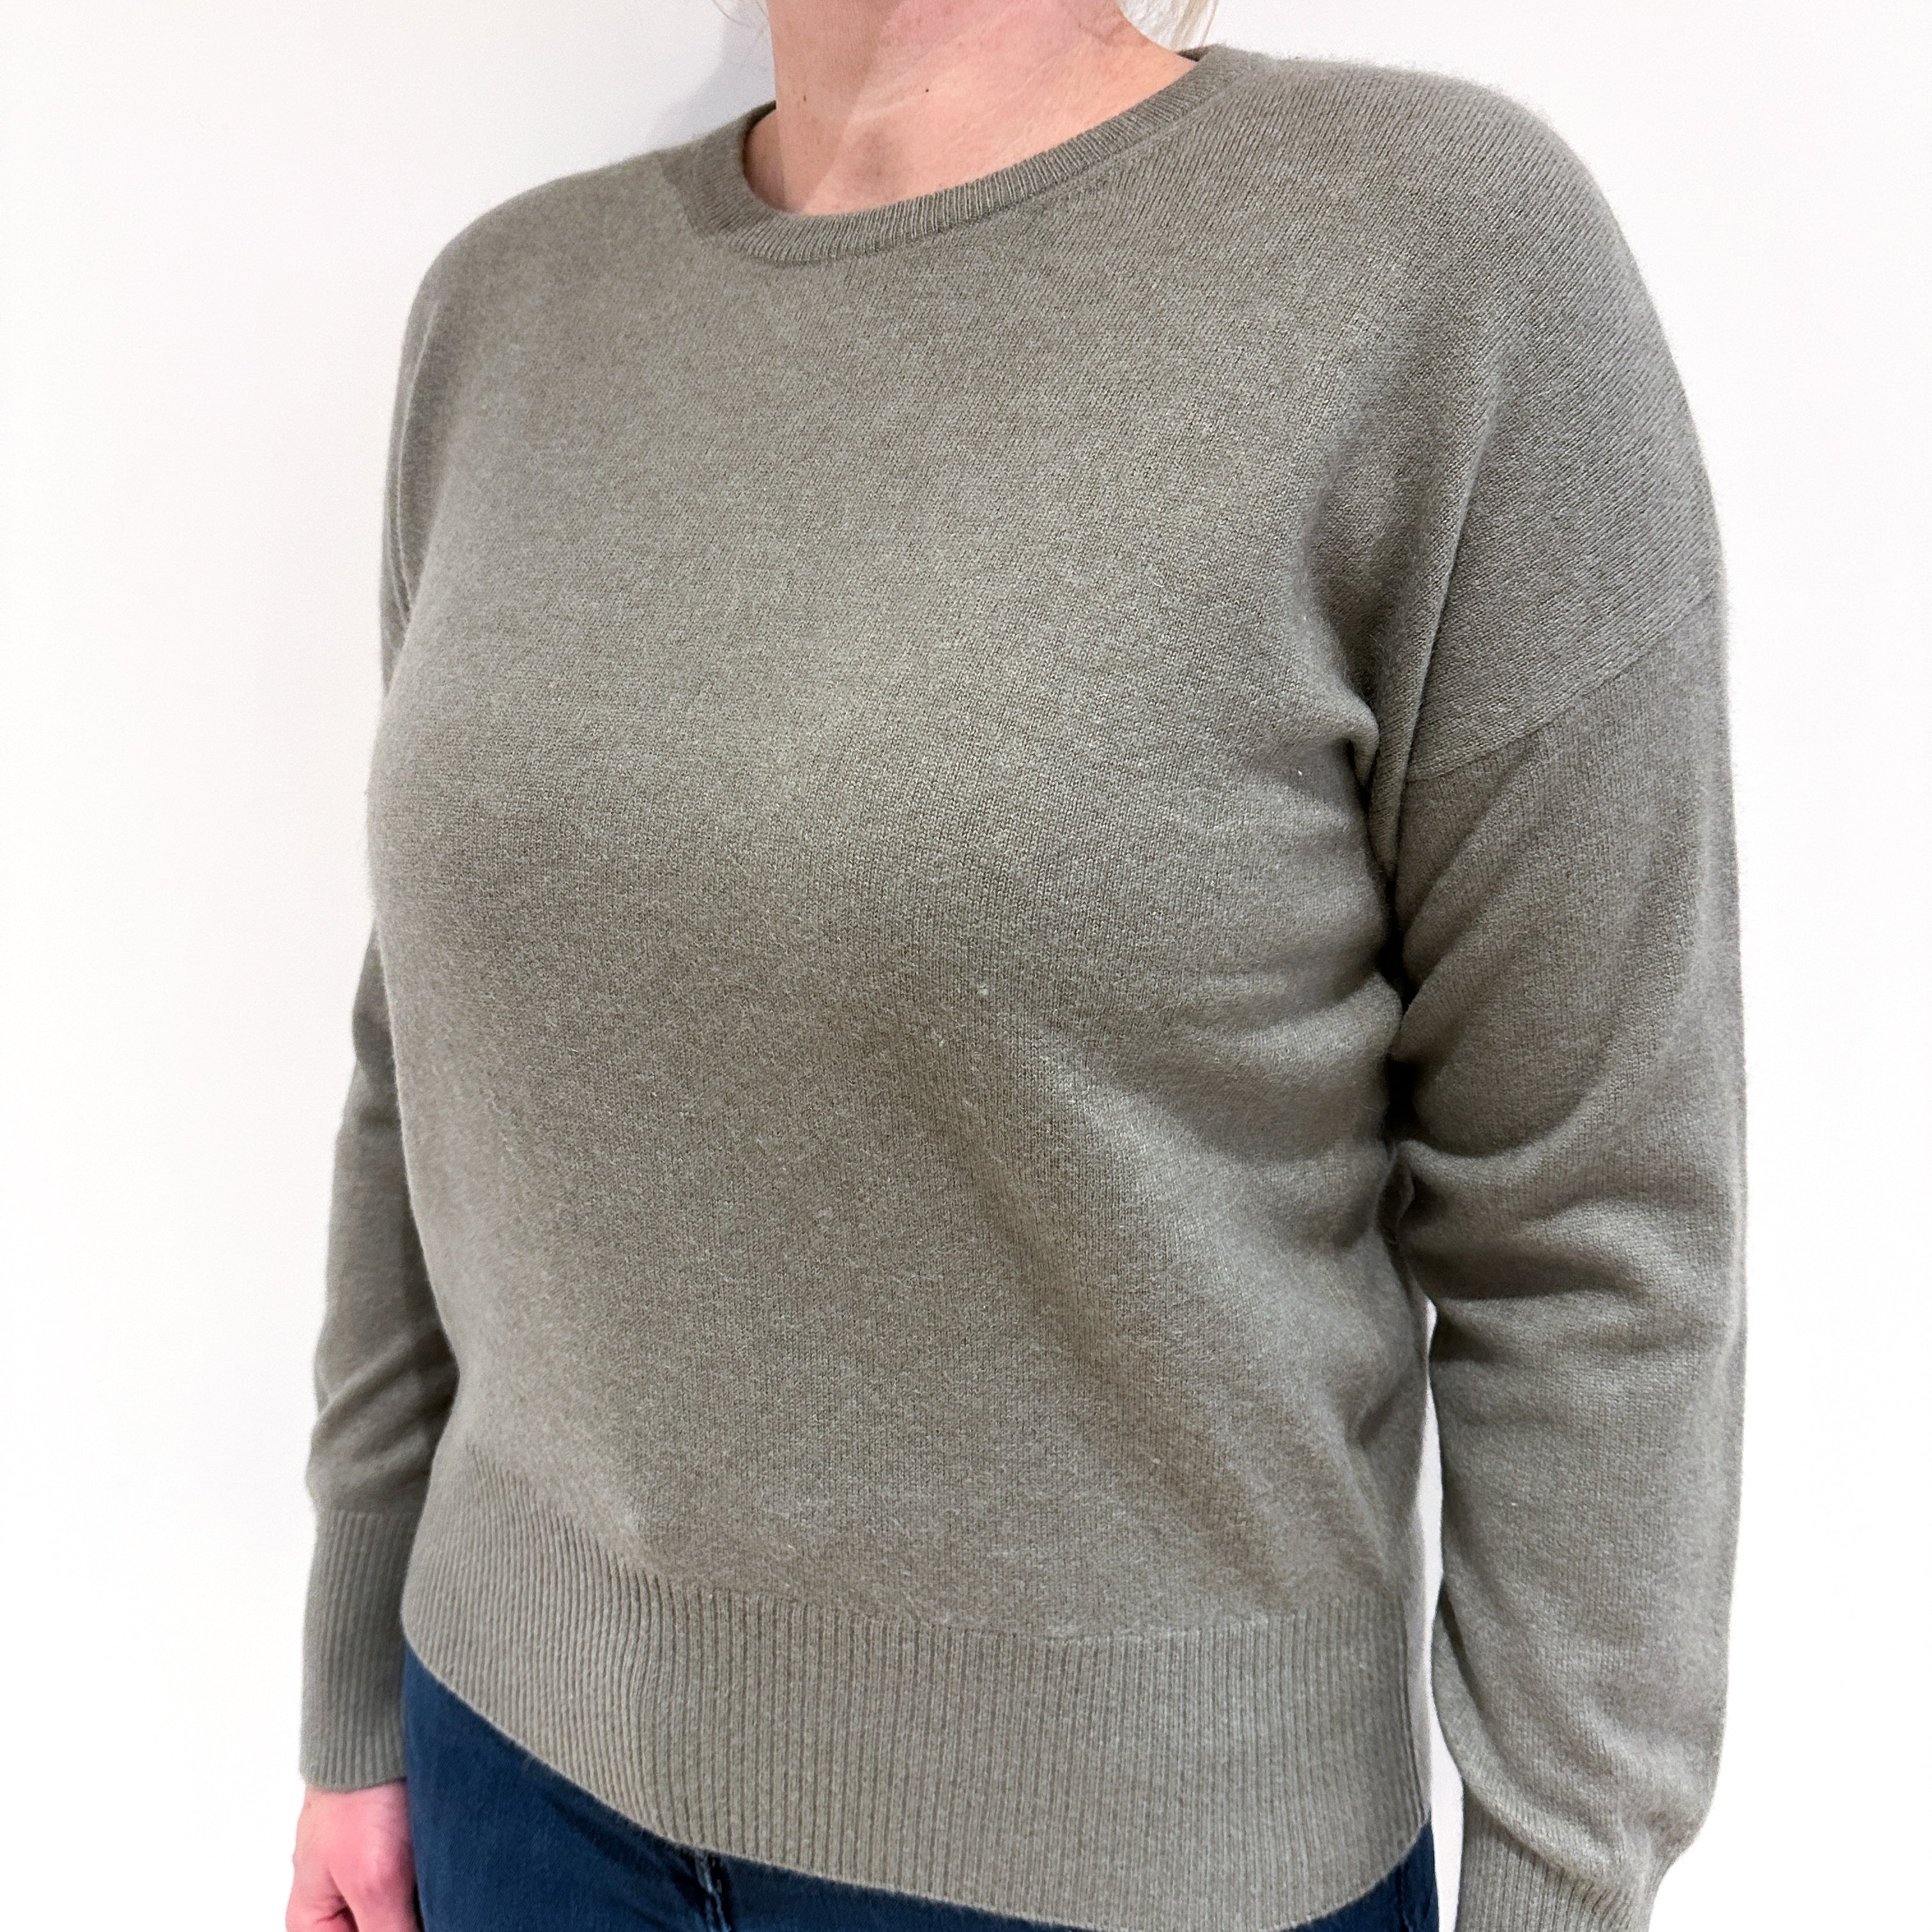 Muted Olive Green Cashmere Crew Neck Jumper Large